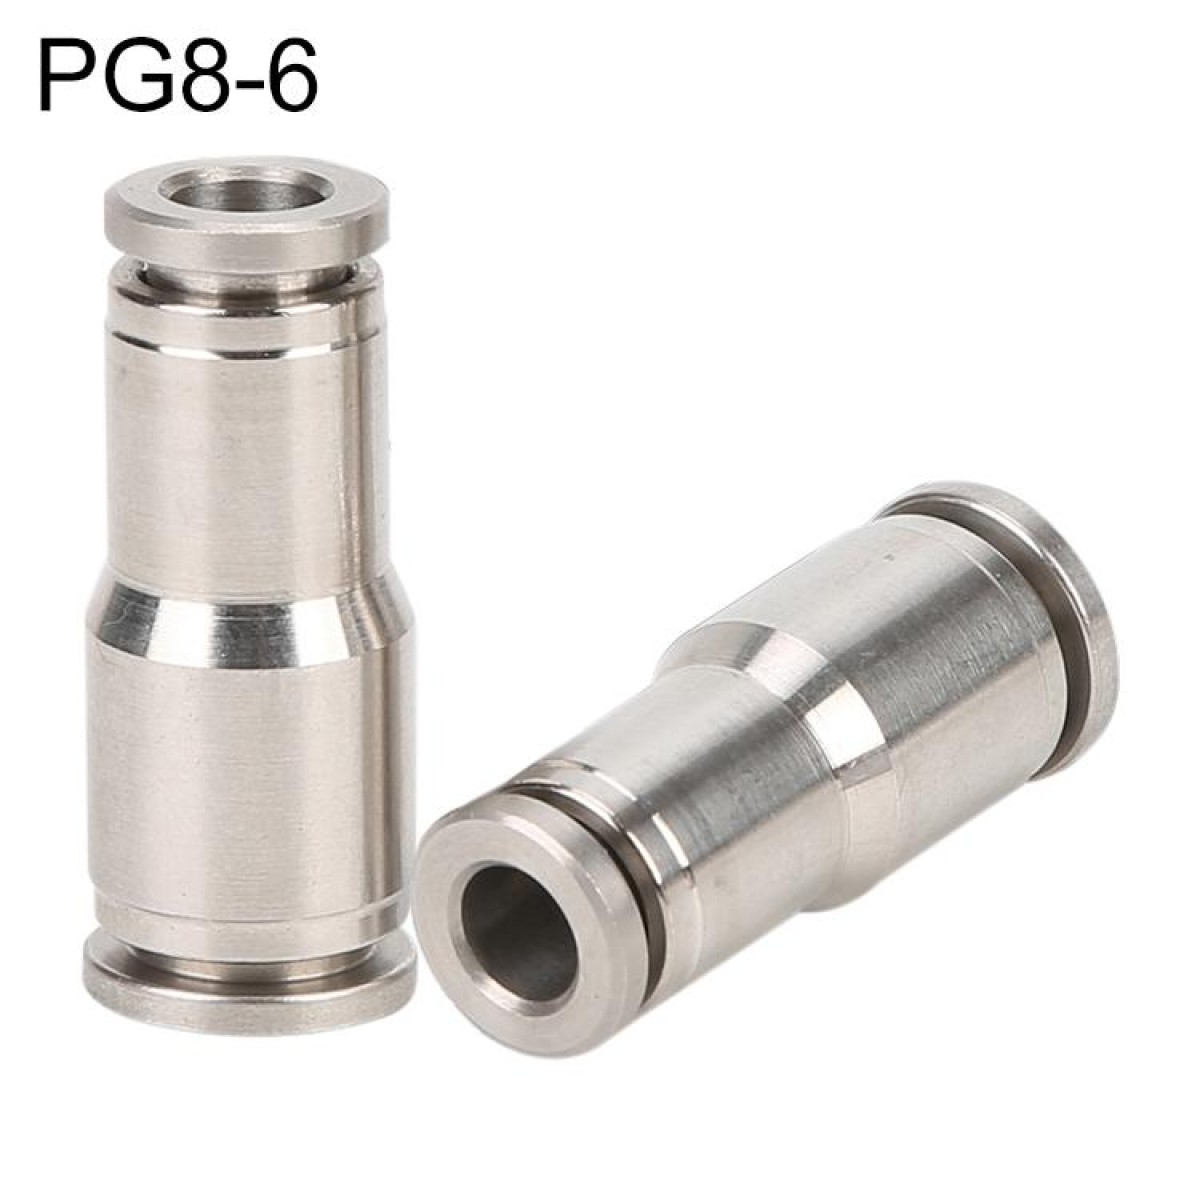 PG8-6 LAIZE Nickel Plated Copper Reducer Straight Pneumatic Quick Fitting Connector